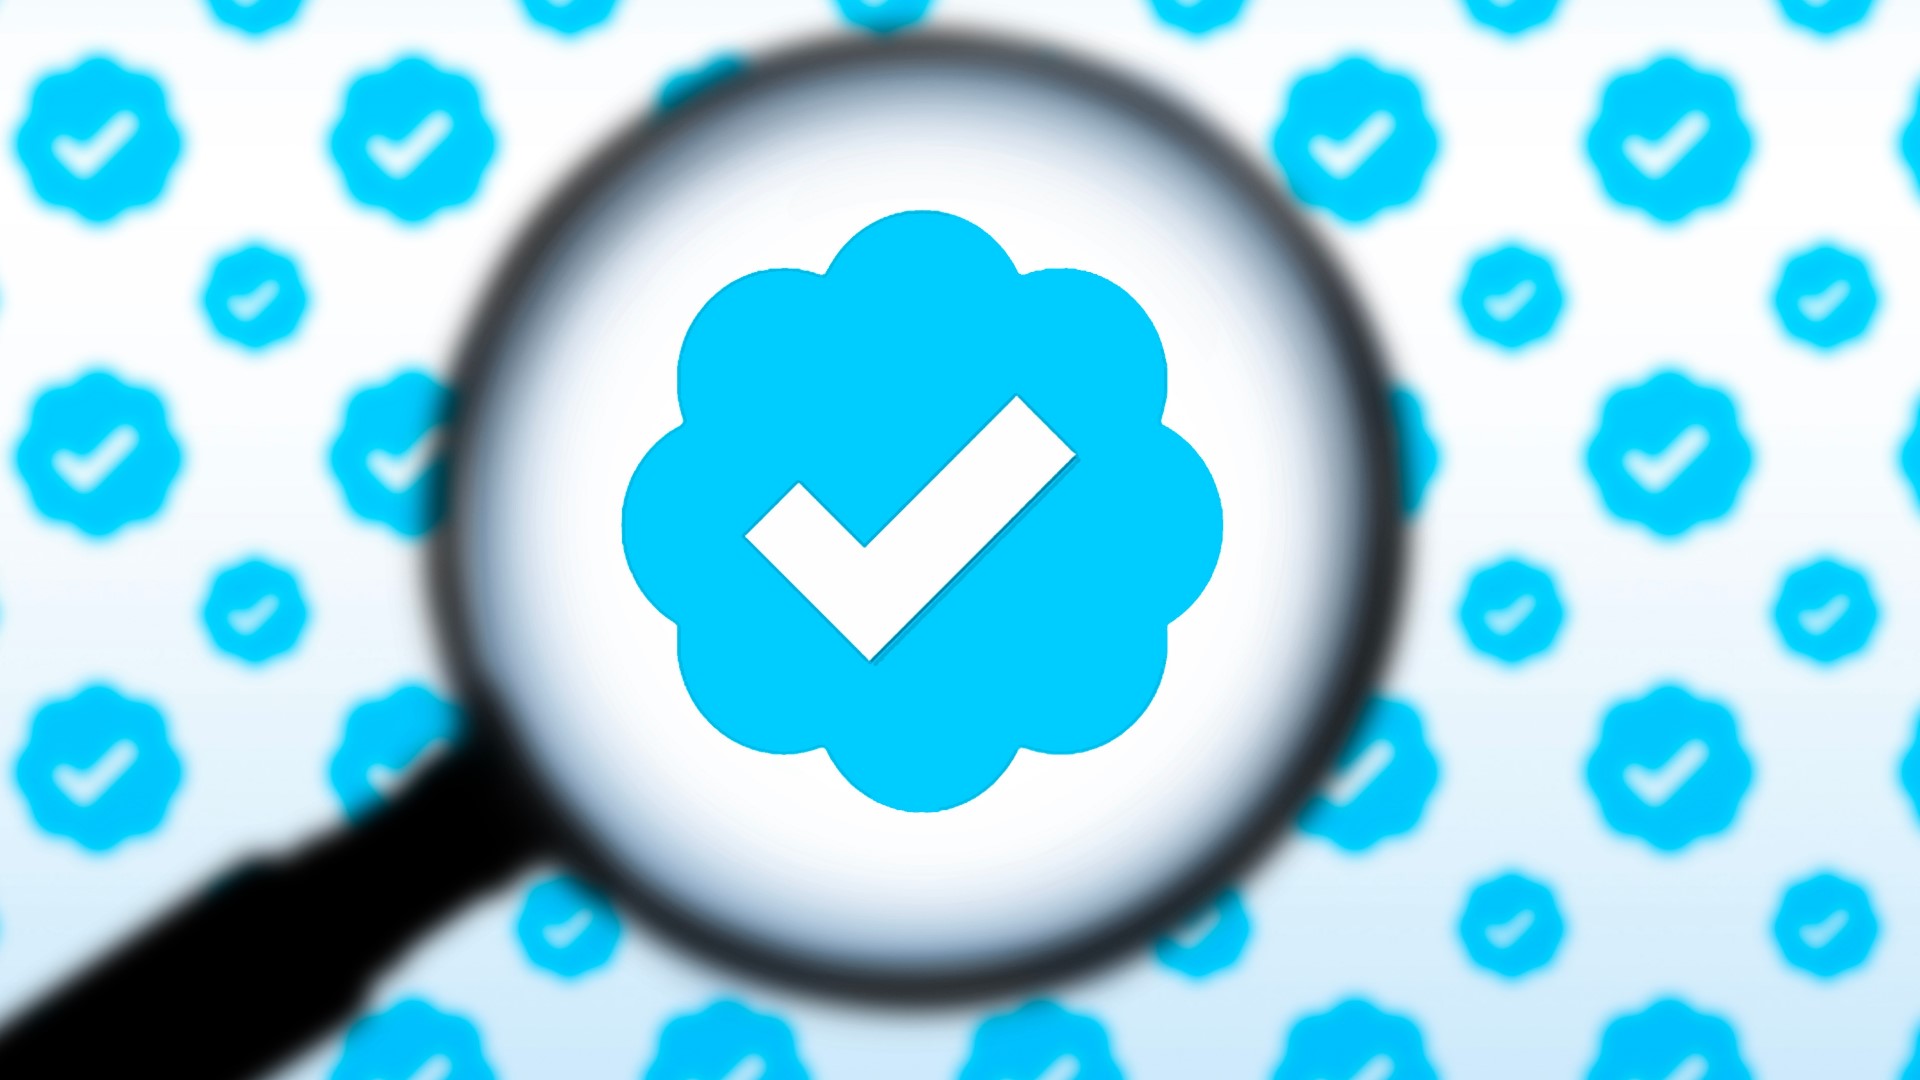 Blue check marks were originally used on Twitter to verify identities and distinguish real accounts from impostors. Now it'll mean someone is paying a monthly fee.